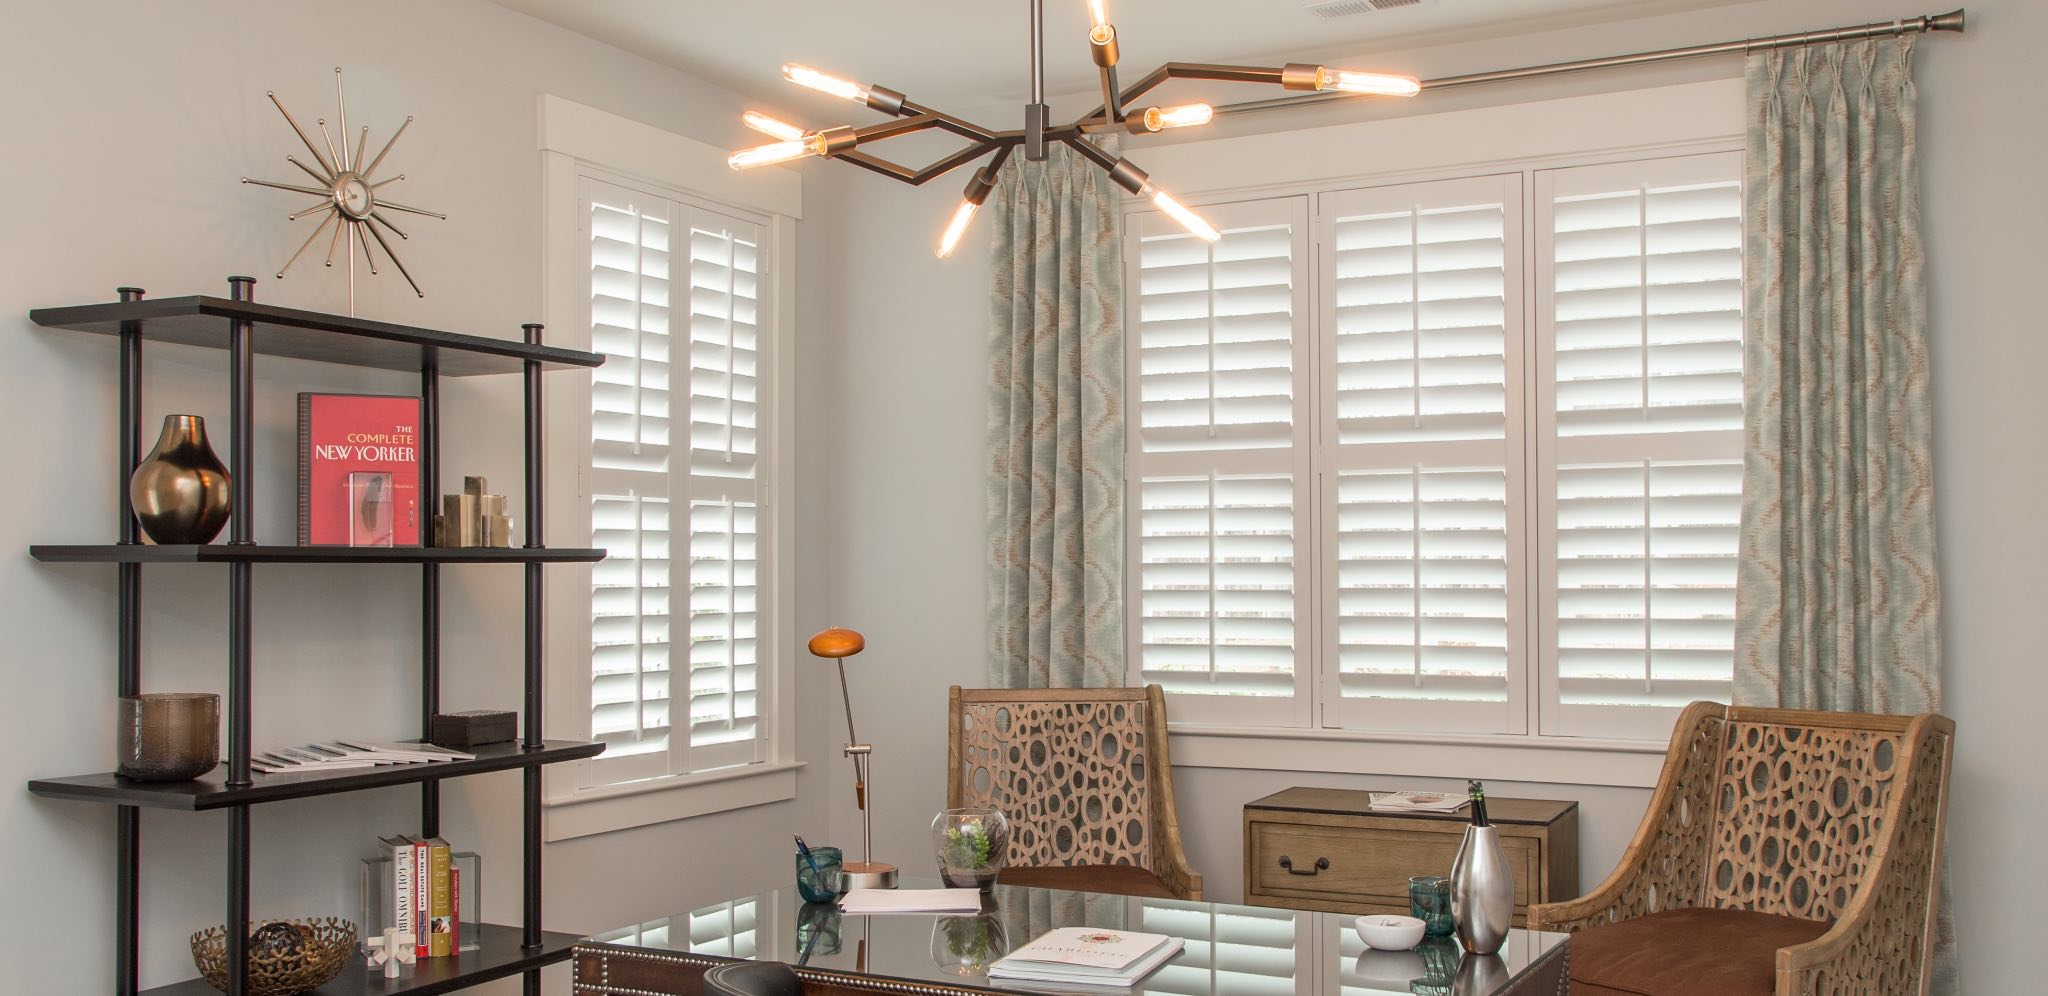 Shutters in a home office